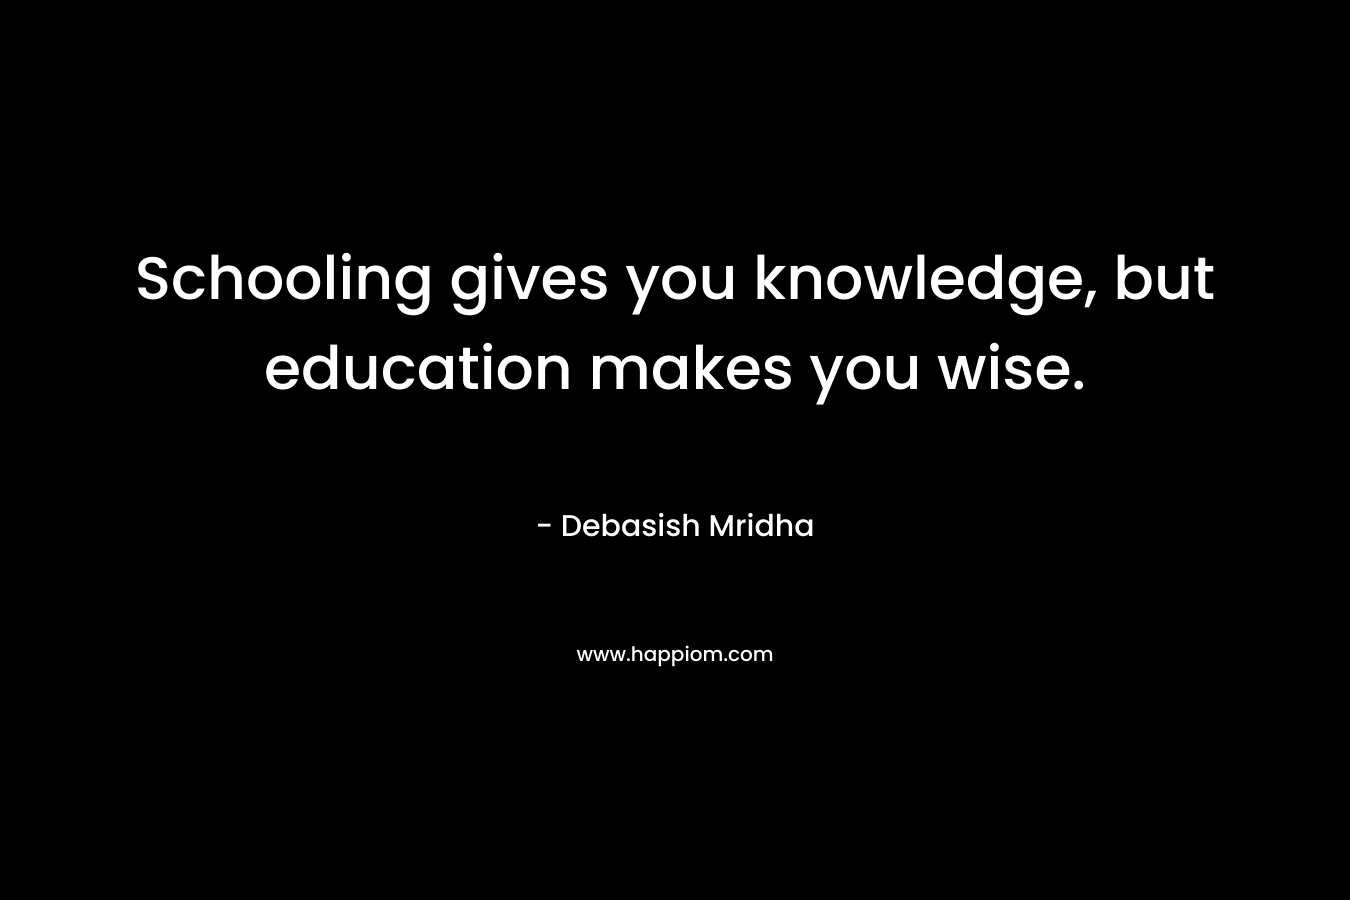 Schooling gives you knowledge, but education makes you wise. – Debasish Mridha